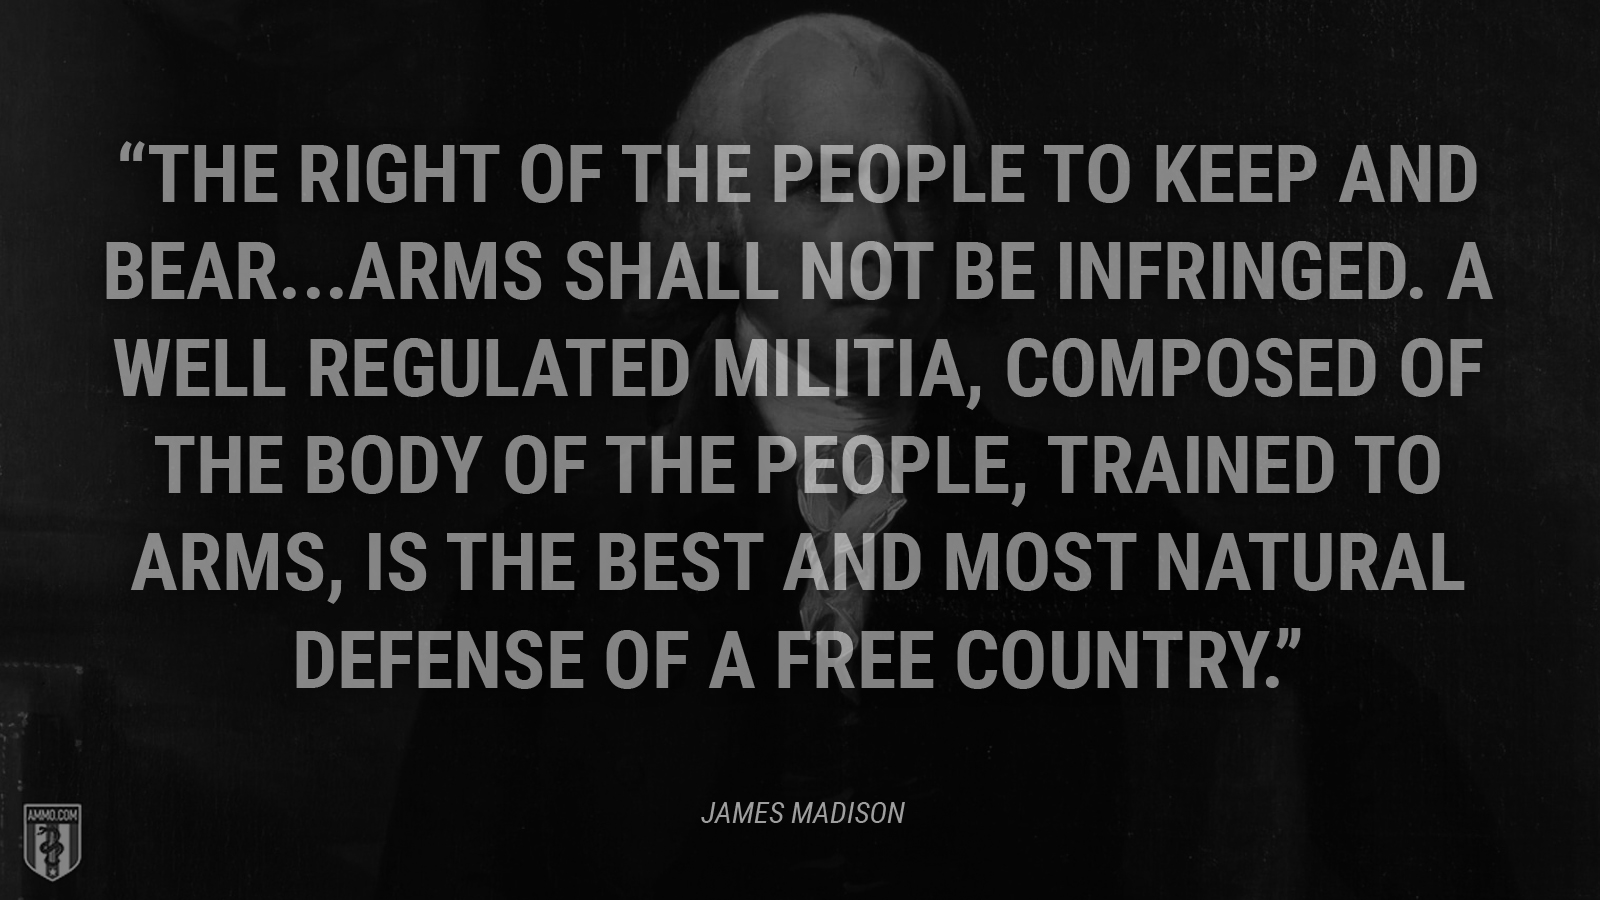 “The right of the people to keep and bear...arms shall not be infringed. A well regulated militia, composed of the body of the people, trained to arms, is the best and most natural defense of a free country.” - James Madison